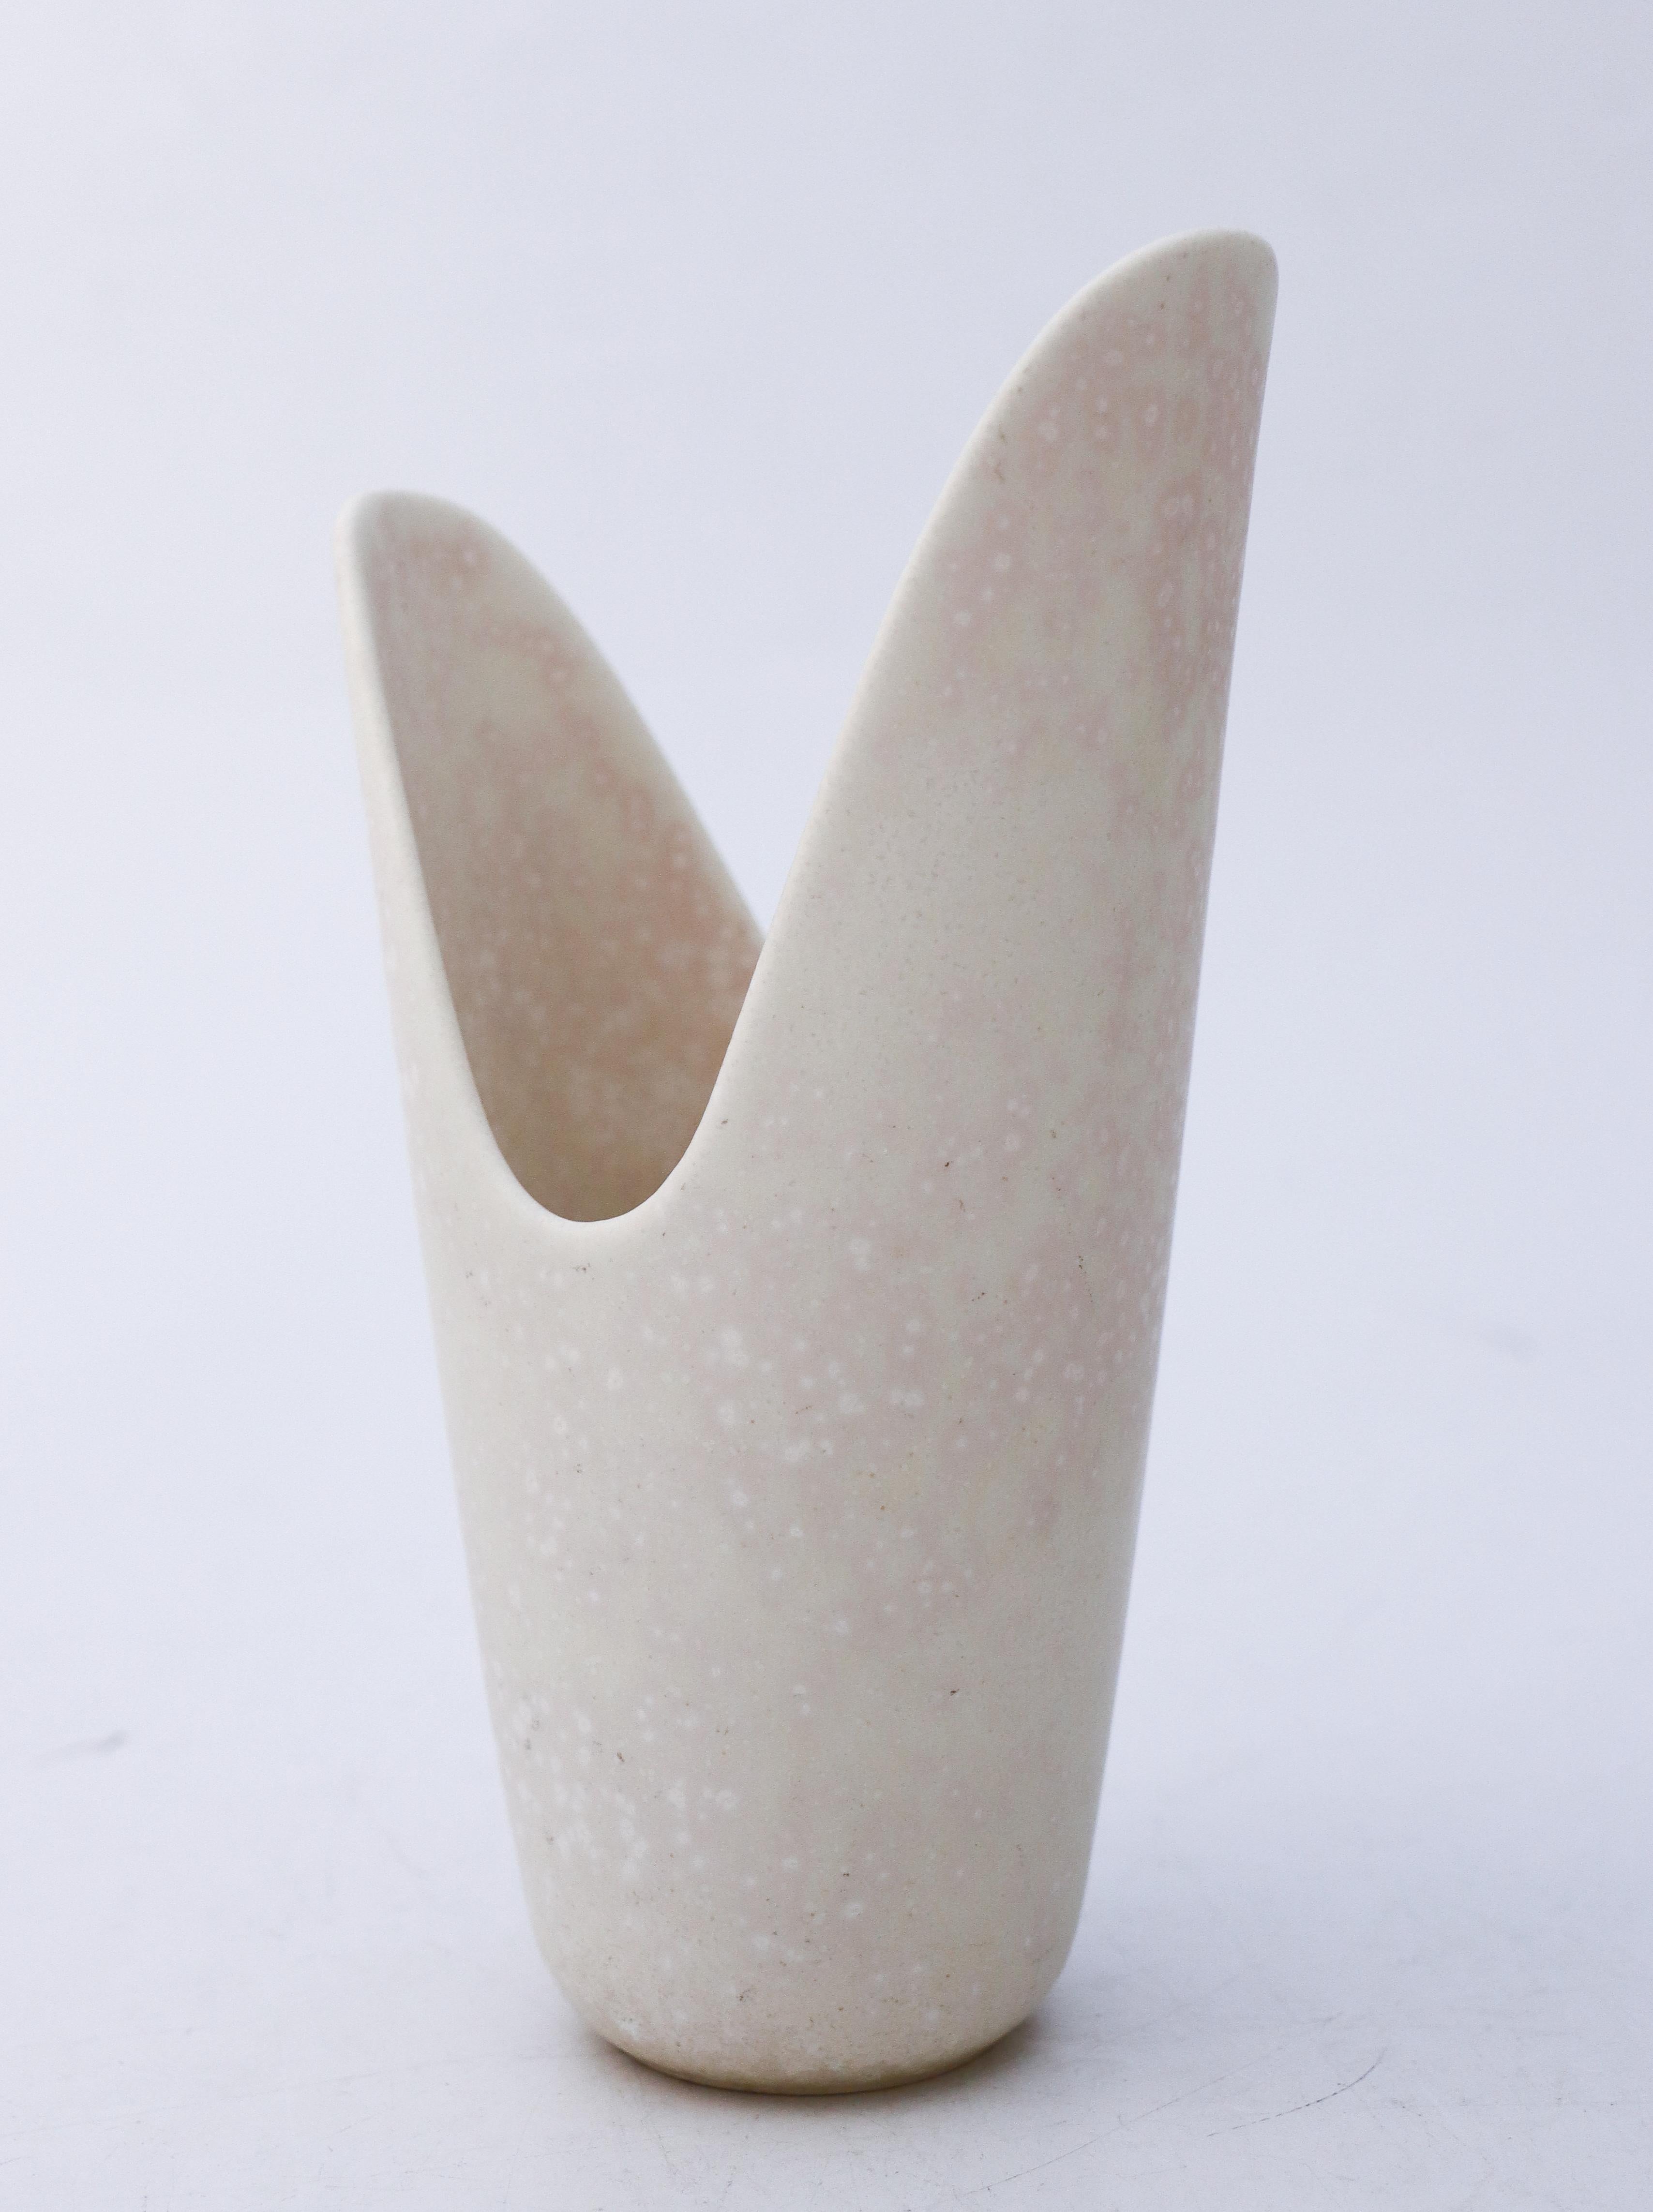 A lovely, white speckled vase with a lovely glaze designed by Gunnar Nylund at Rörstrand, it's 18.5 cm (7.4) high and 10.5 x 6.5 cm (4.2 x 2.6